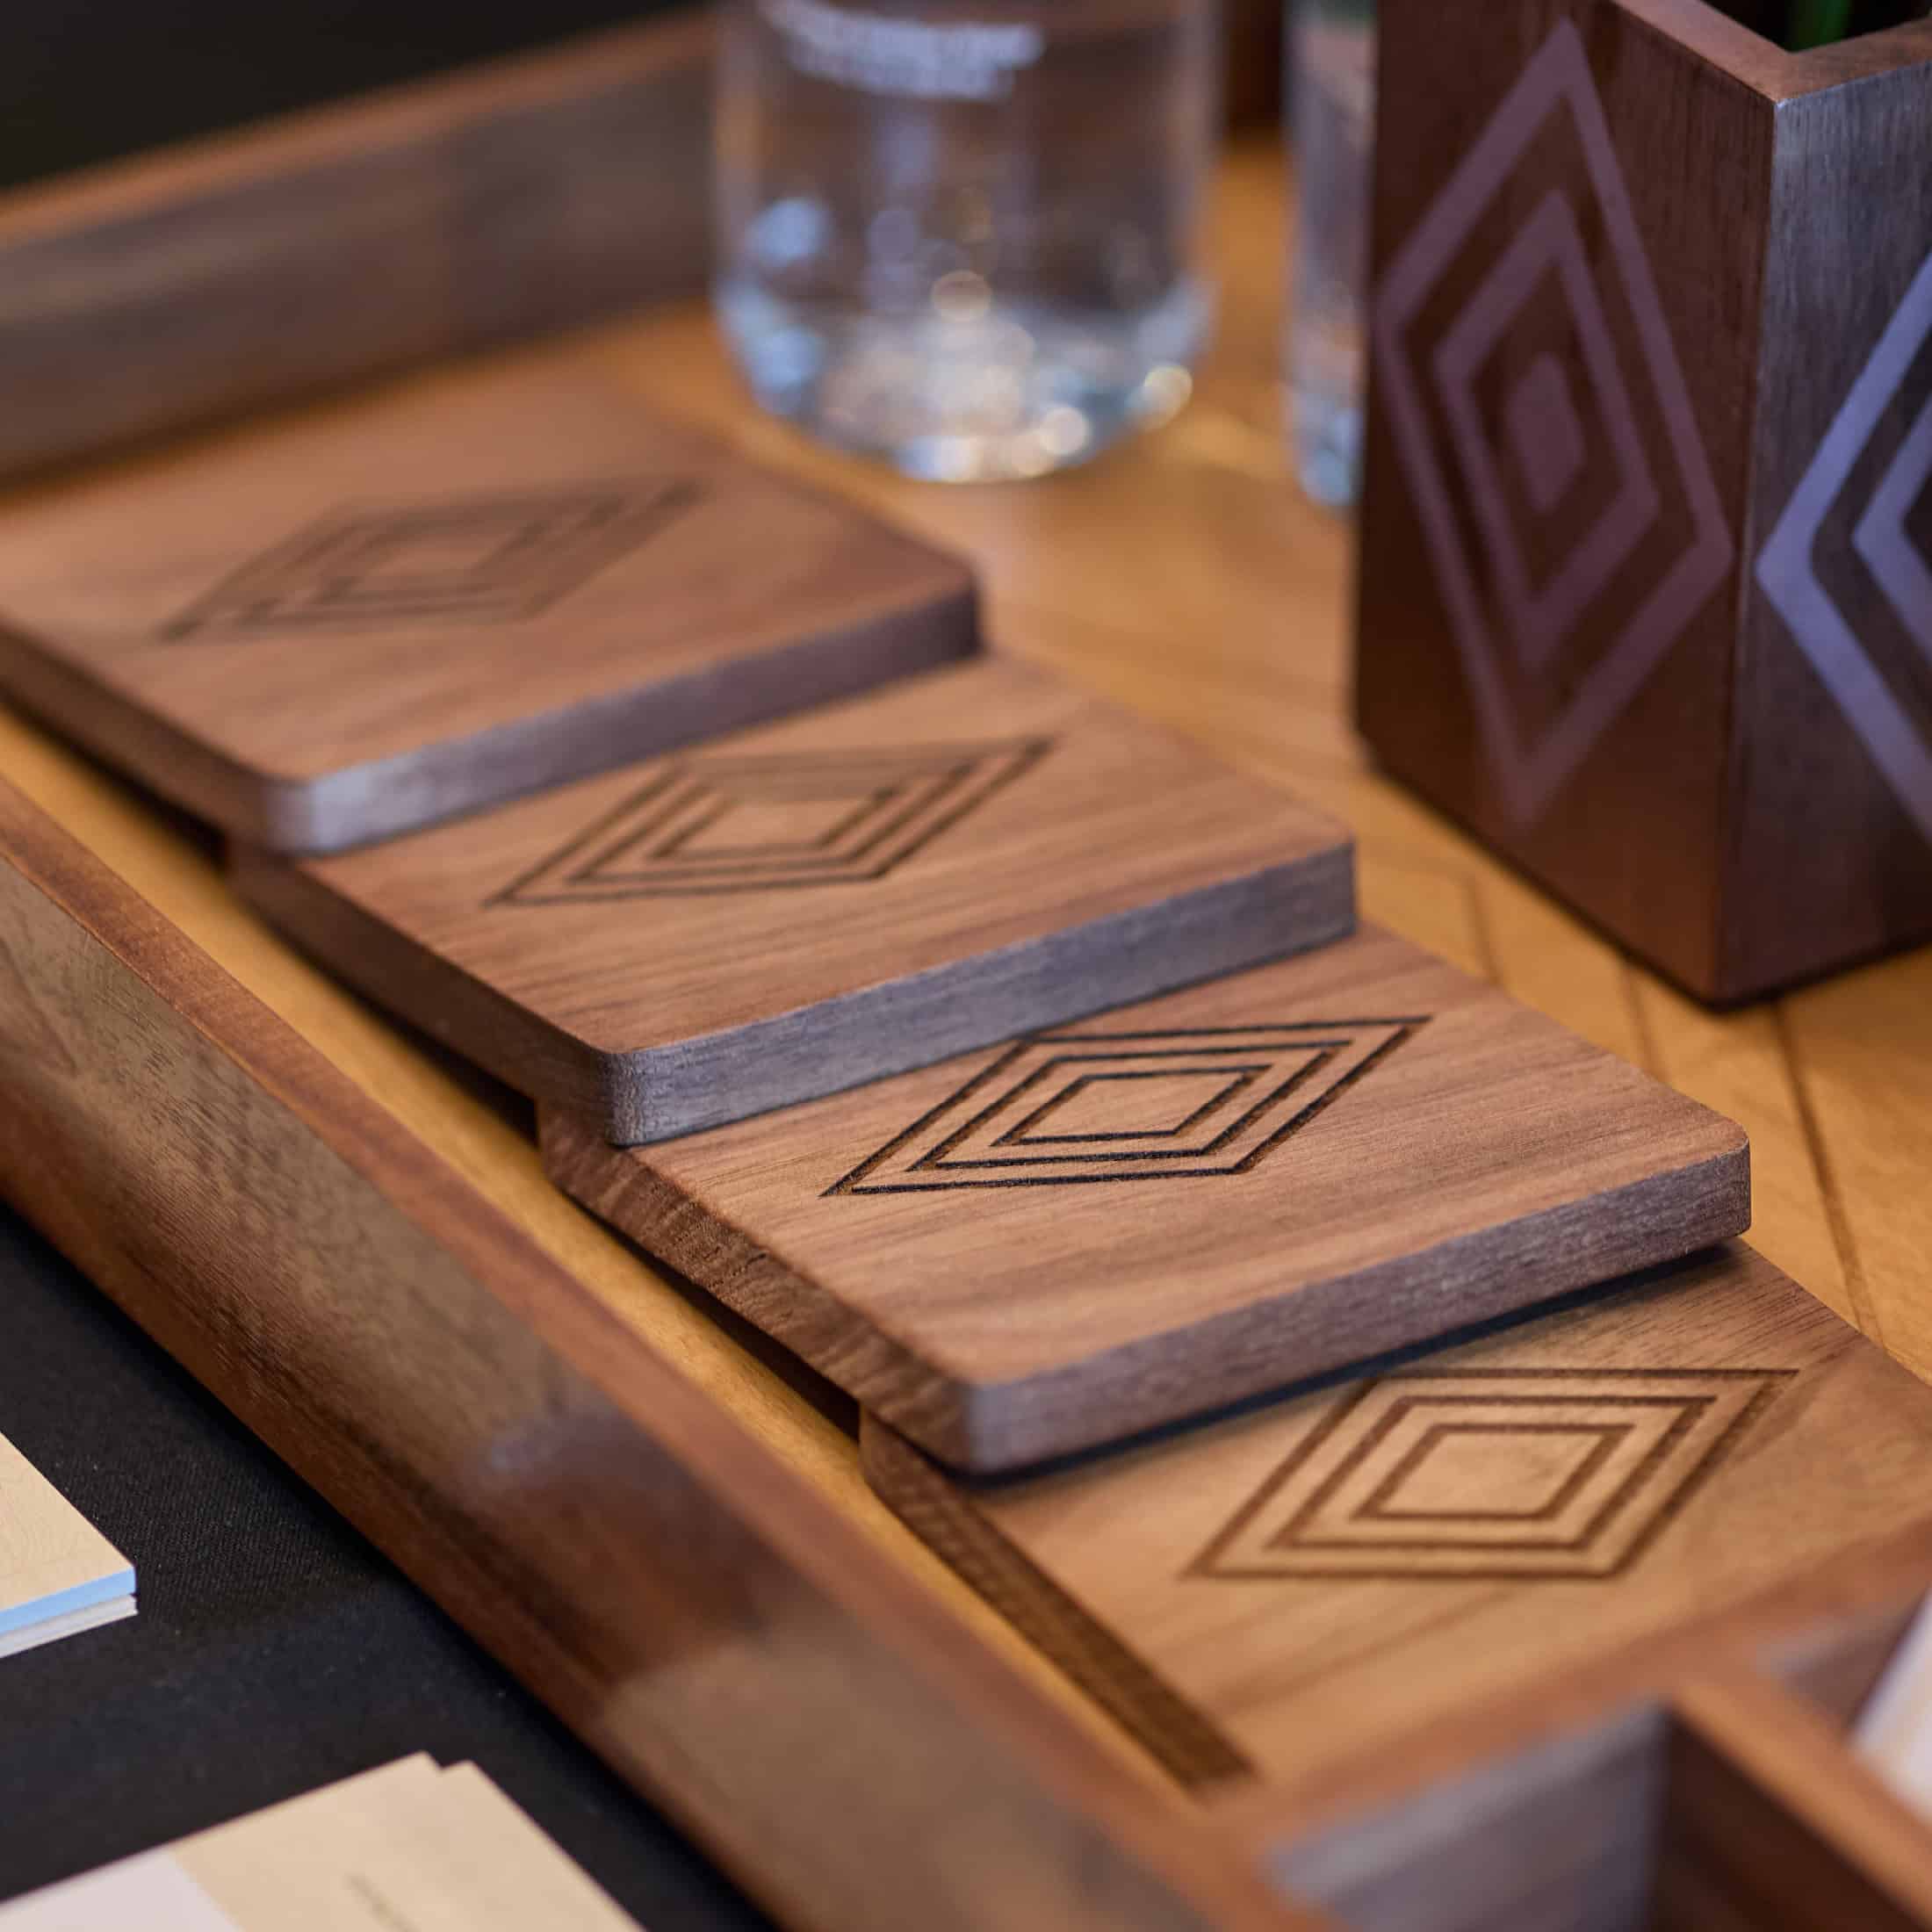 Wooden coasters with diamonds engraved in the center are stacked on a table